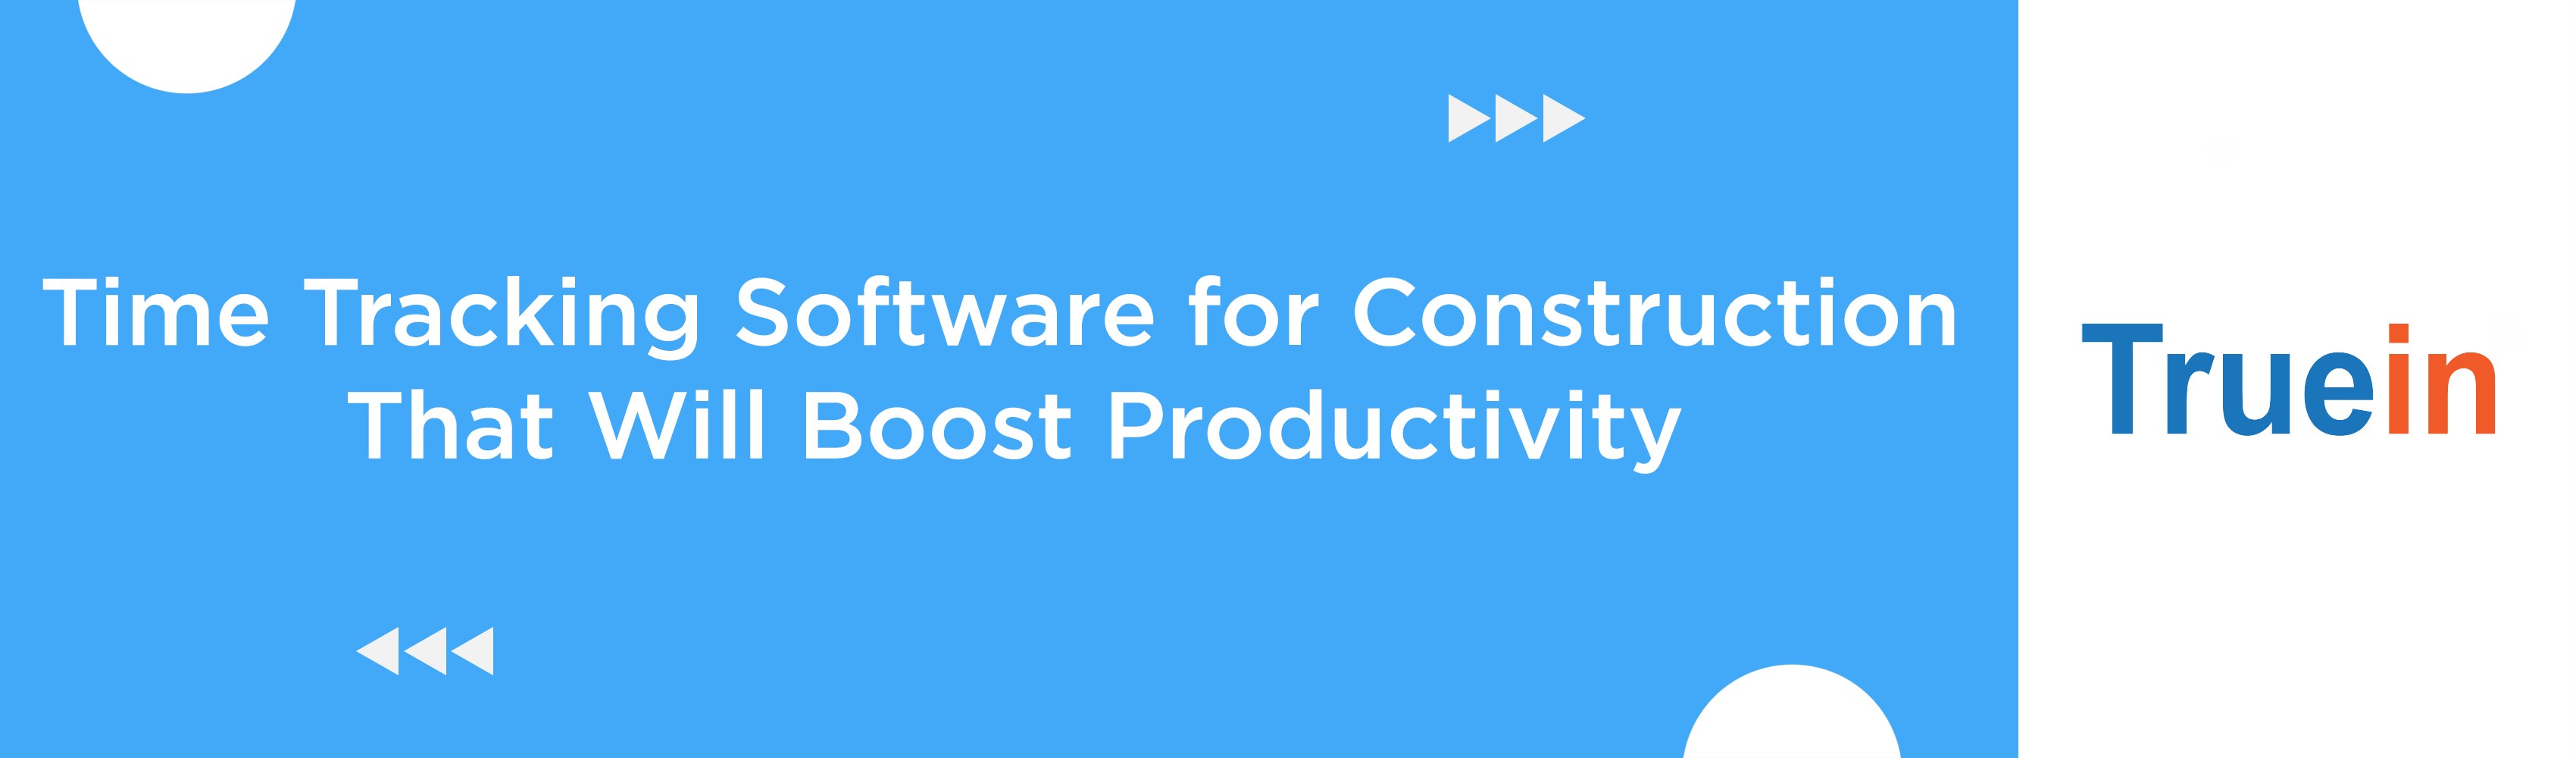 Time Tracking Software for Construction That Will Boost Productivity